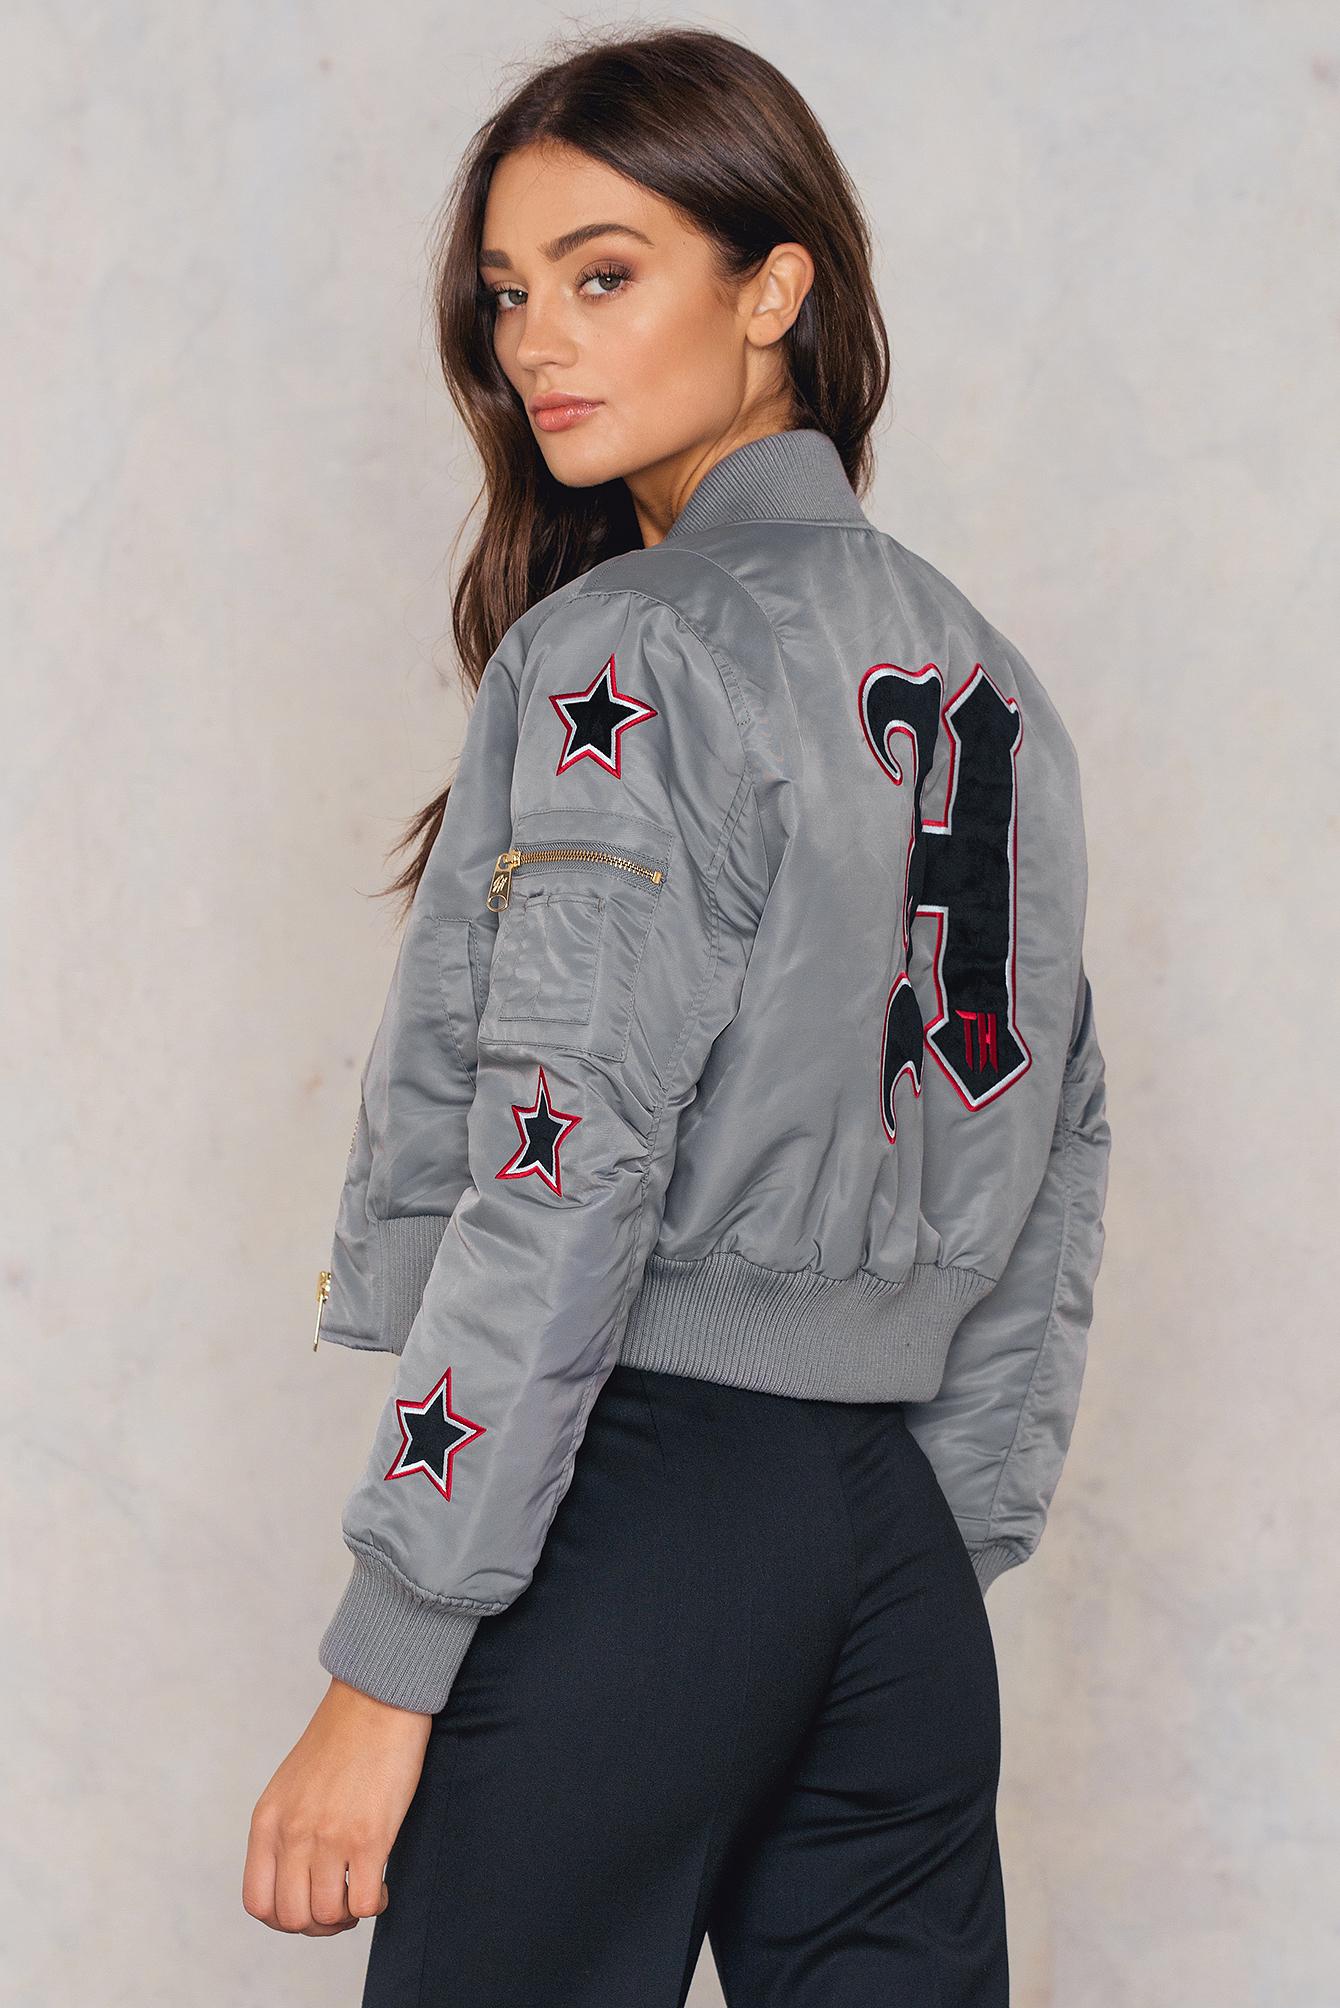 Tommy Hilfiger Denim Gigi Hadid Thermore Insulated Bomber in Gray | Lyst